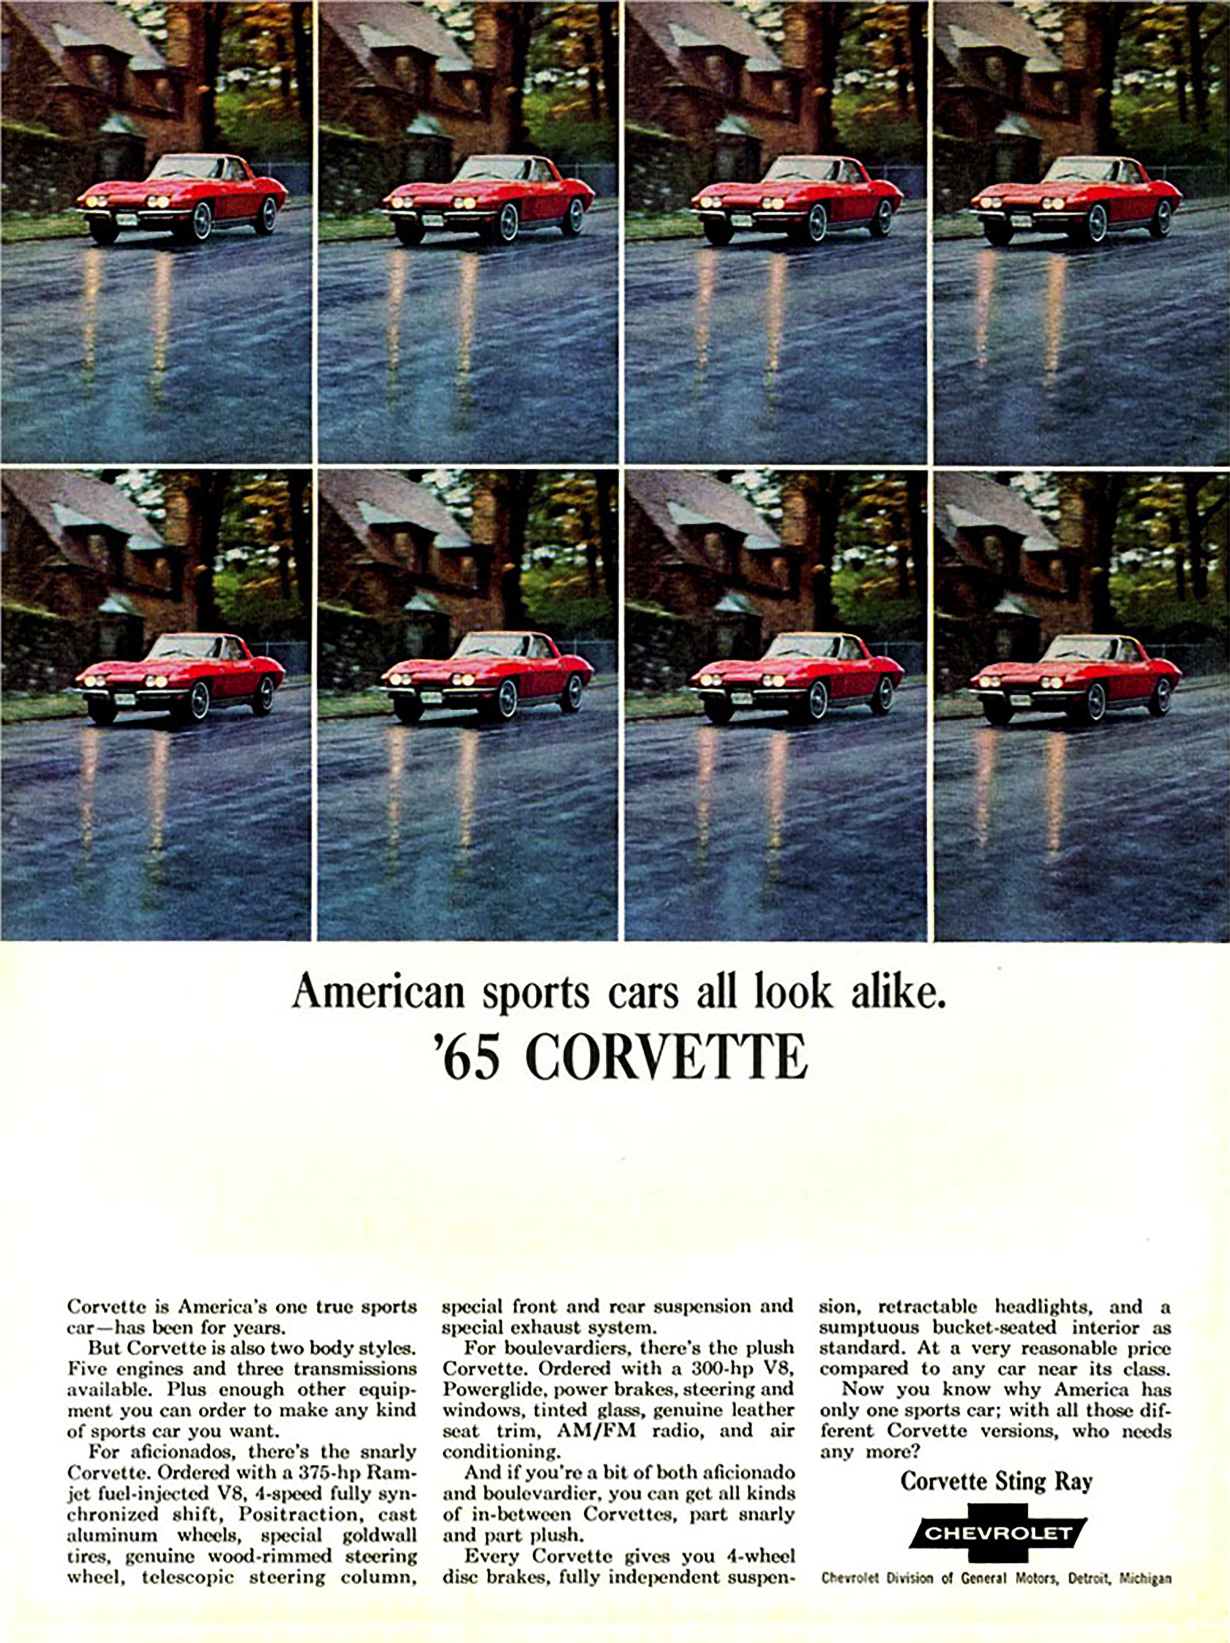 1965 Chevrolet Ad, Corvette Sting Ray Sport Coupe "American sports cars all look alike."